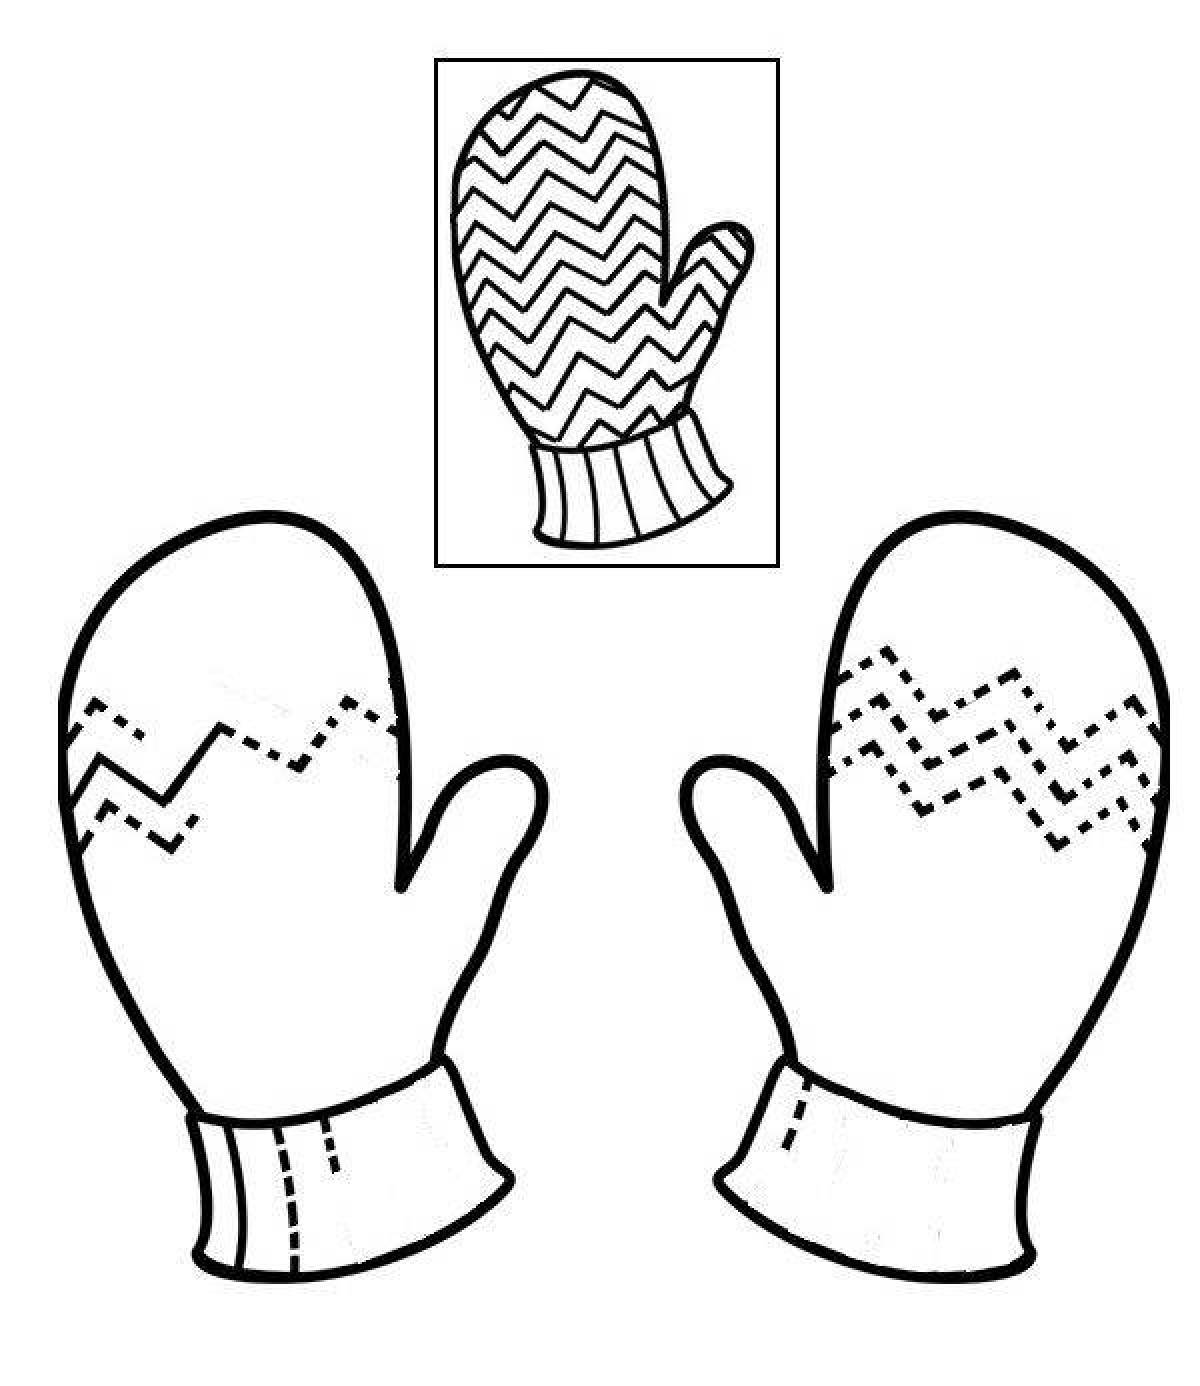 Exquisite mittens coloring book for kids